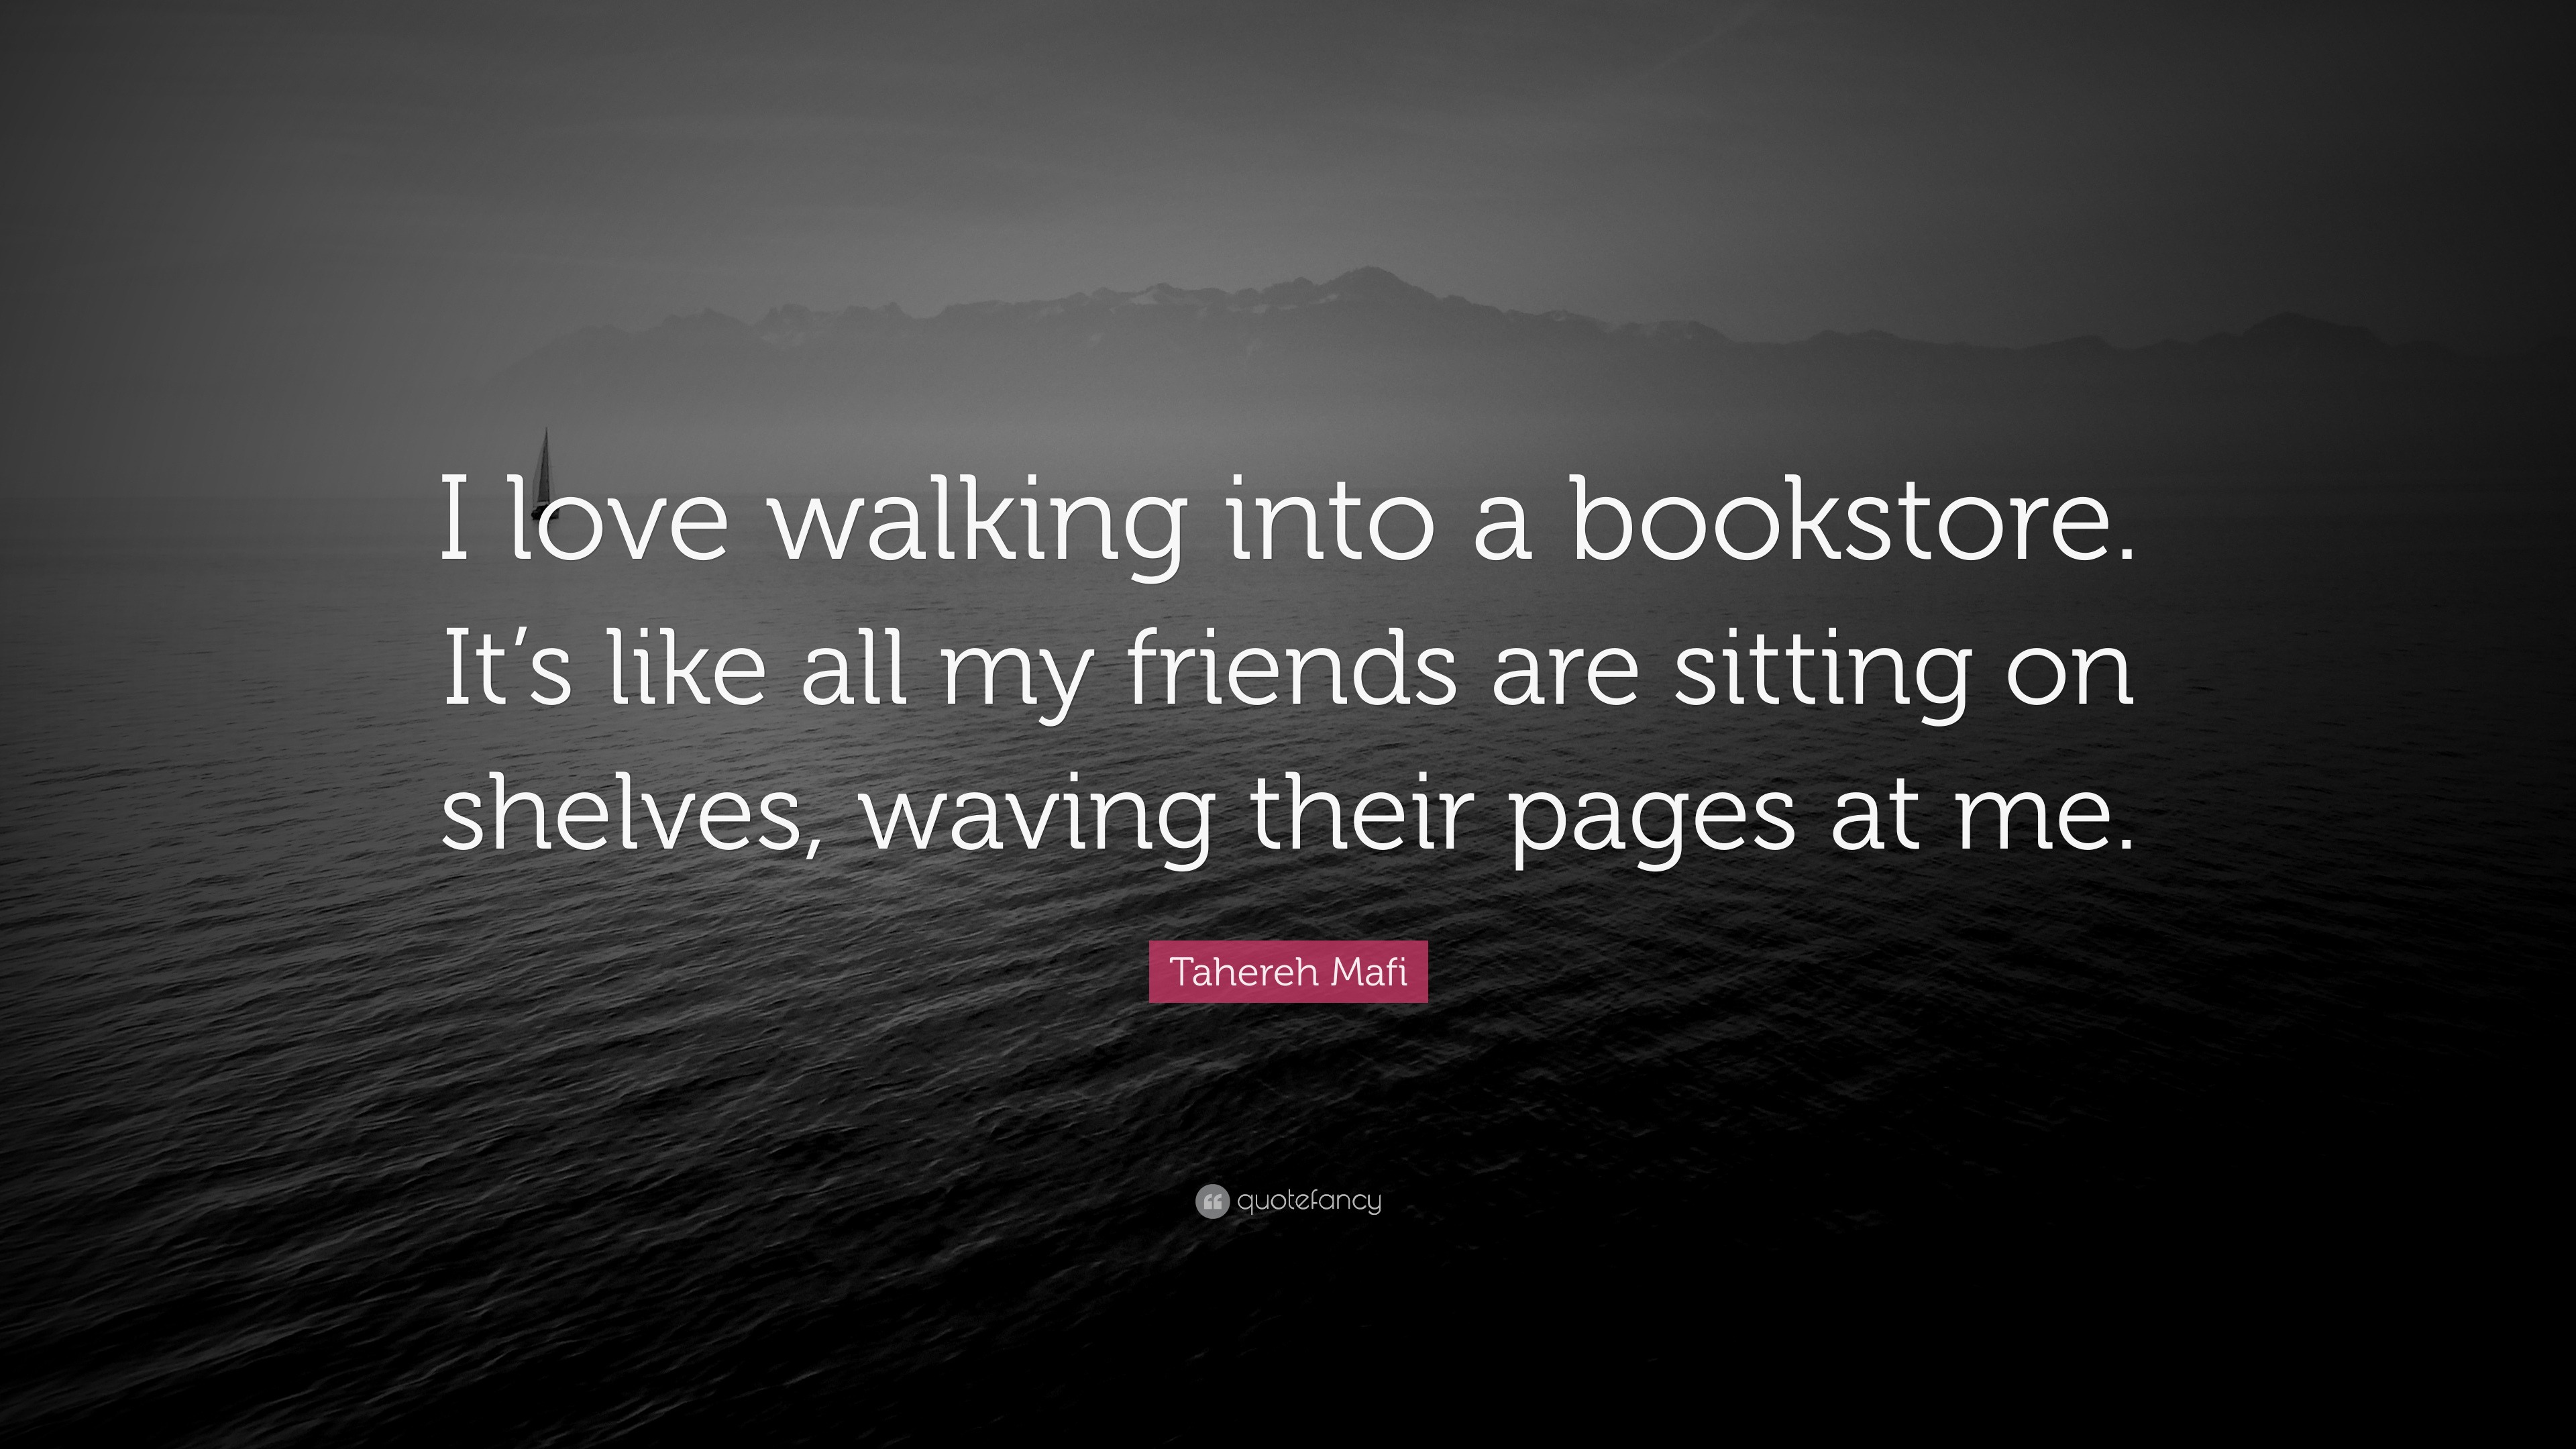 Tahereh Mafi Quote “I love walking into a bookstore It s like all my